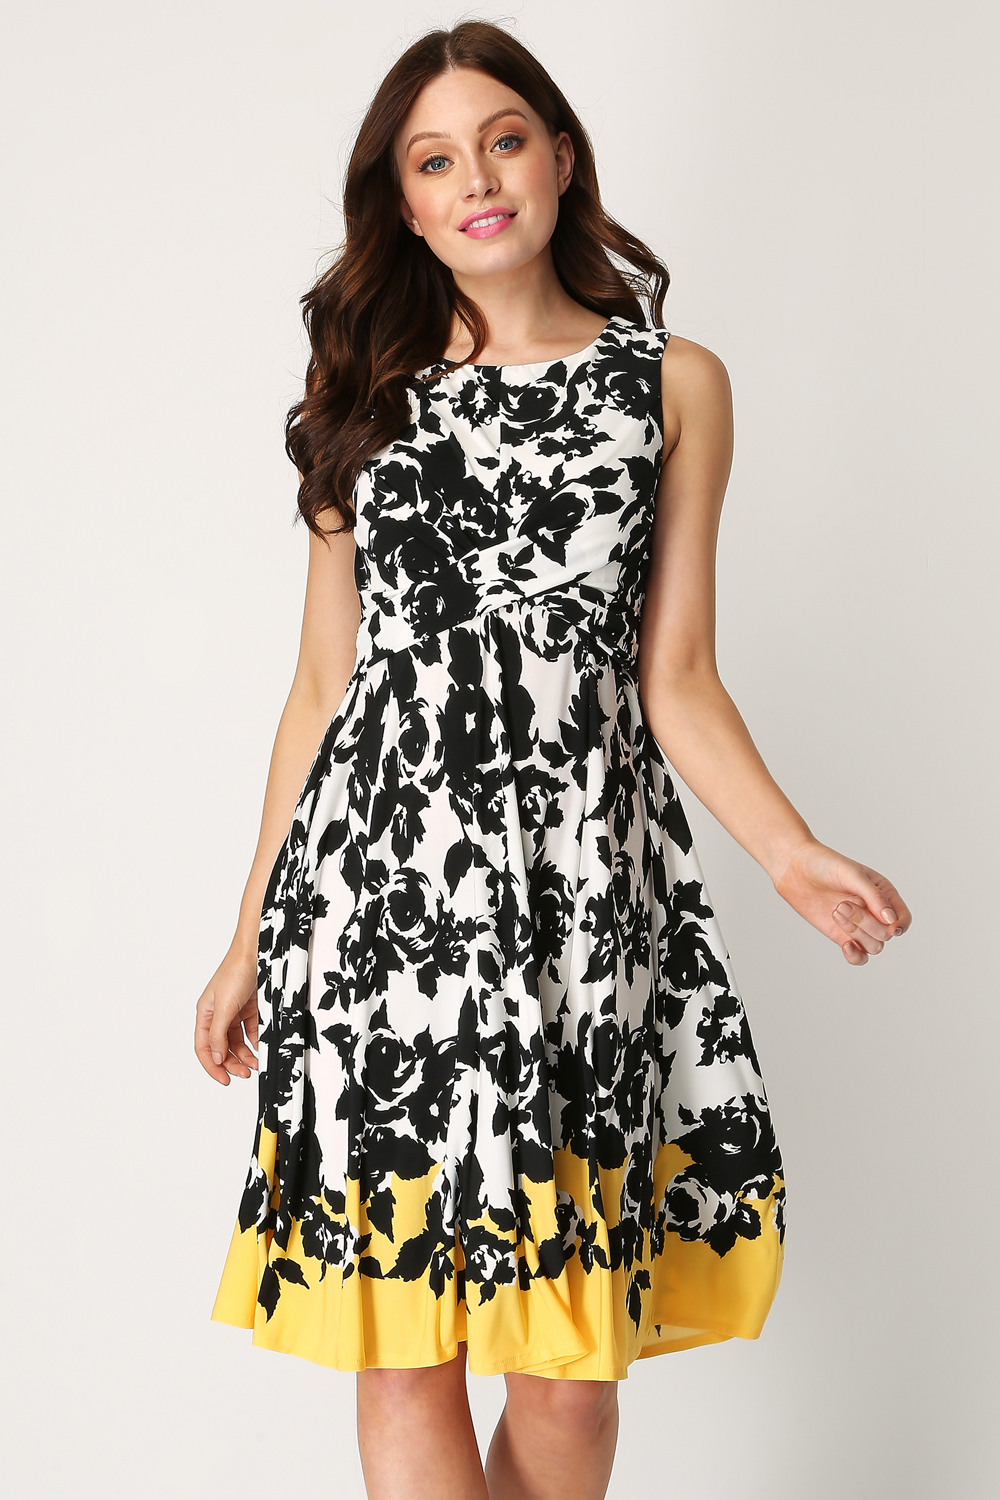 Yellow Fit and Flare Contrast Floral Dress, Image 2 of 4